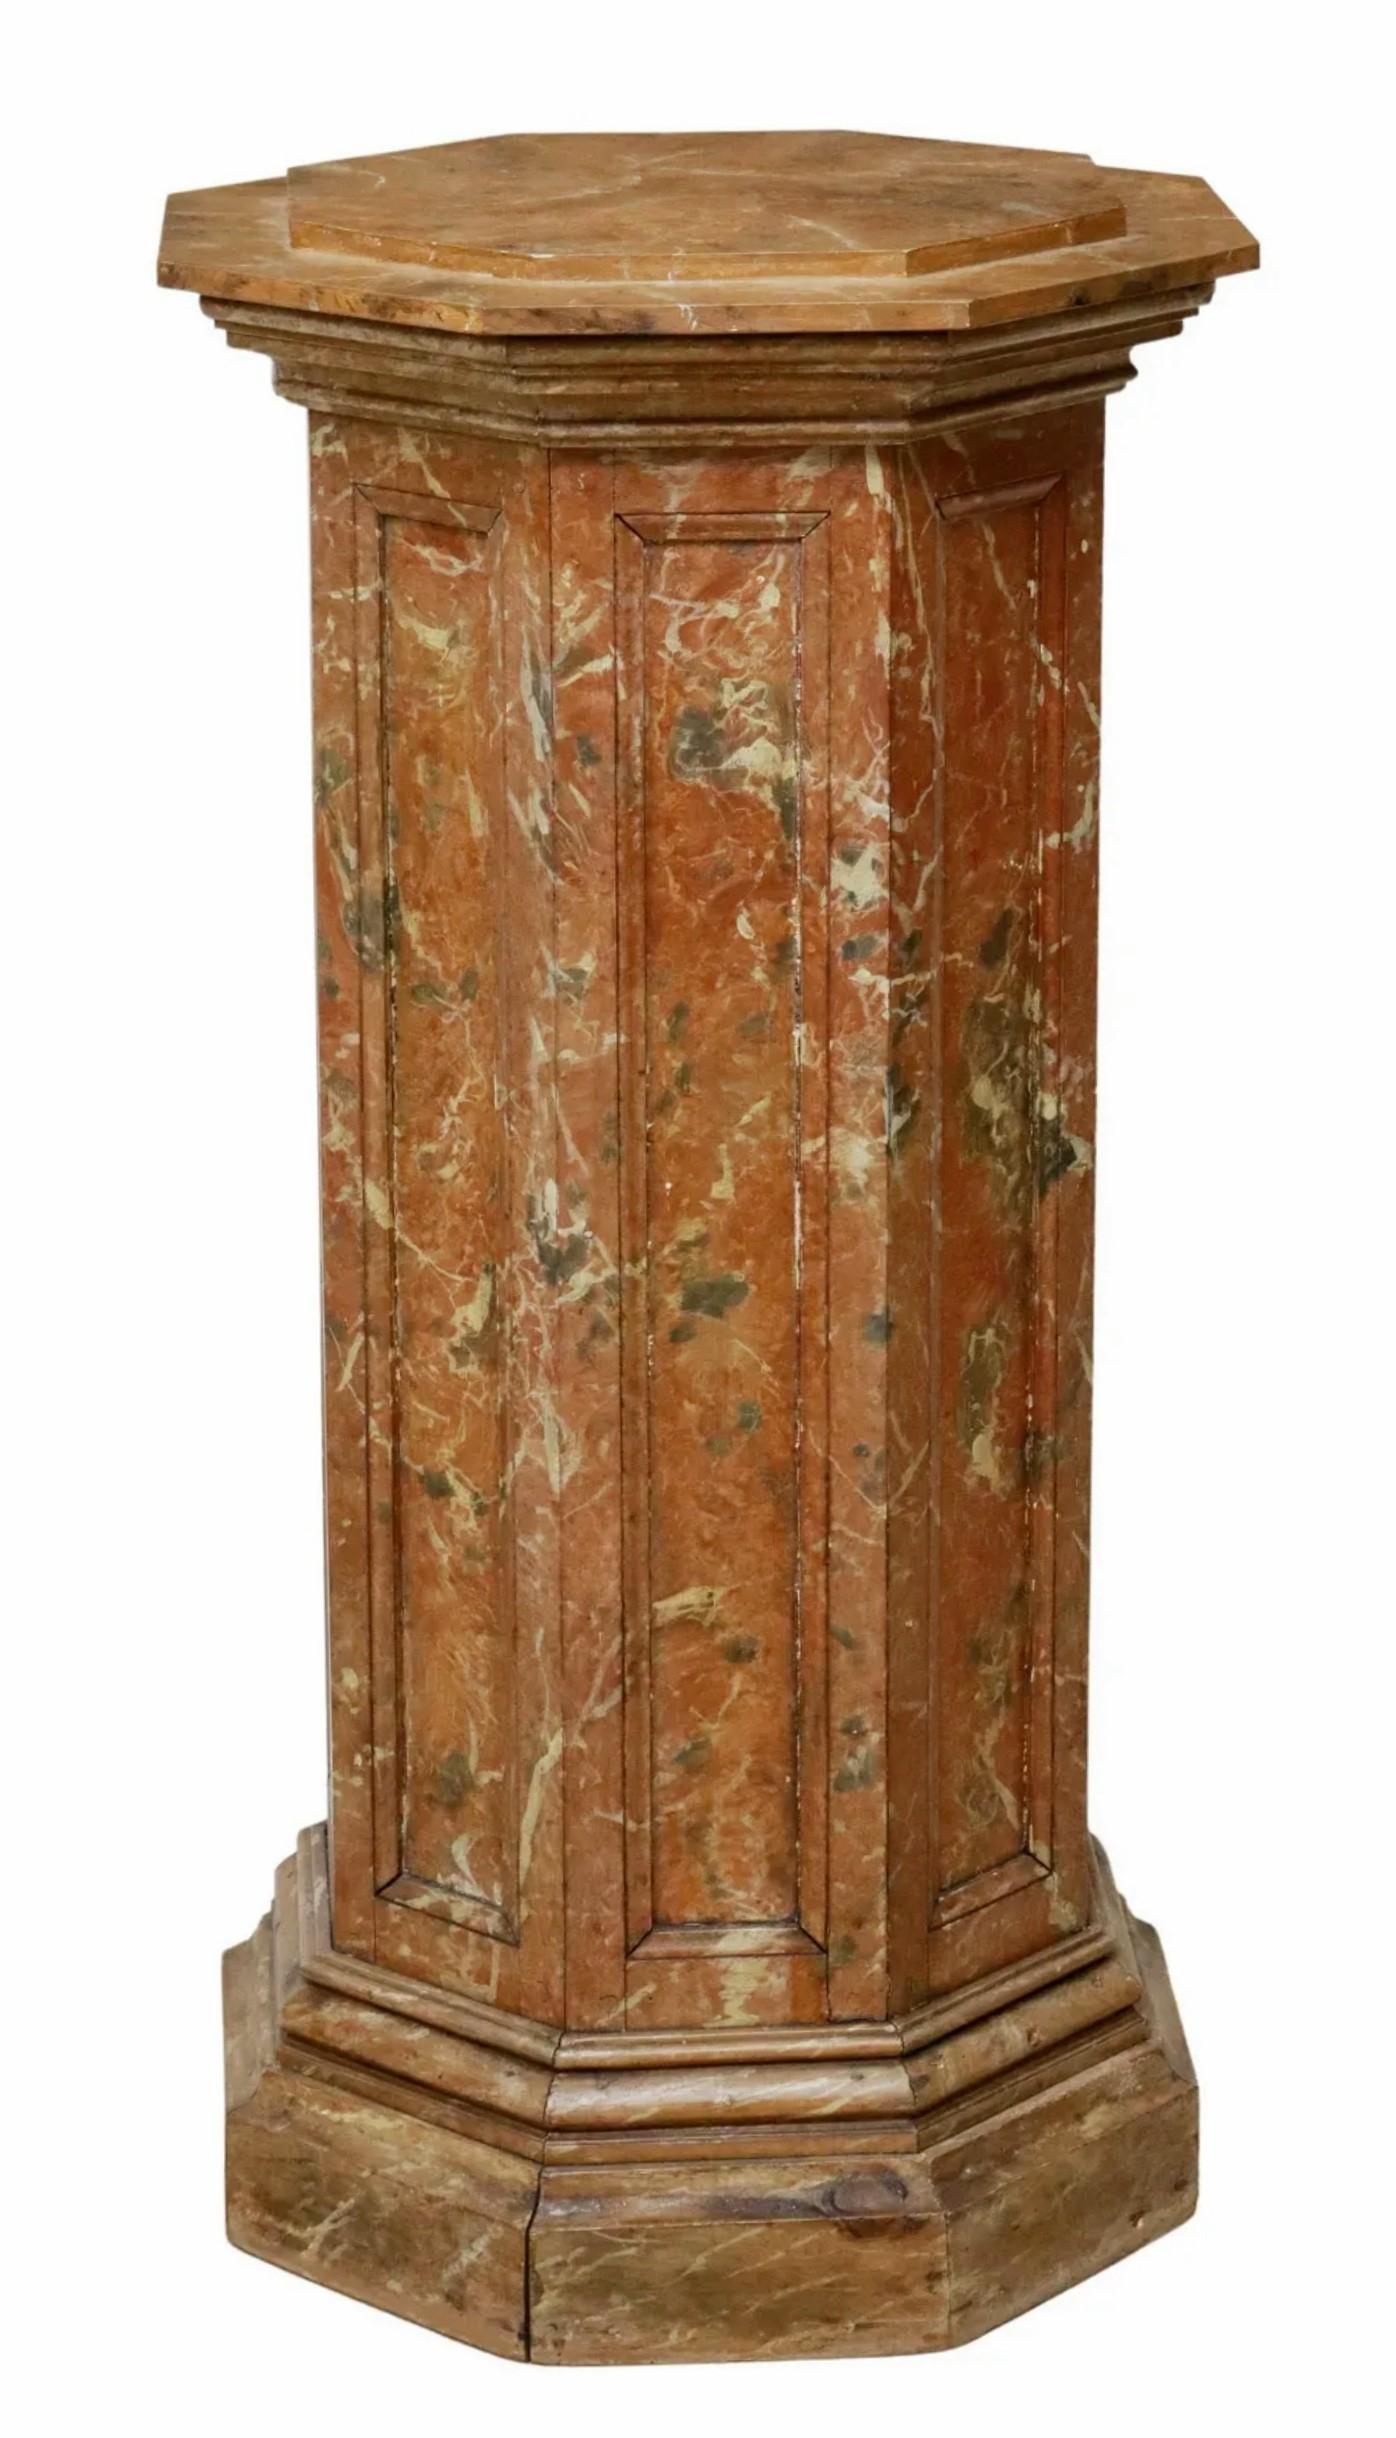 Neoclassical Revival Late 19th/Early 20th Century Italian Neo-classical Marbleized Wood Pedestal